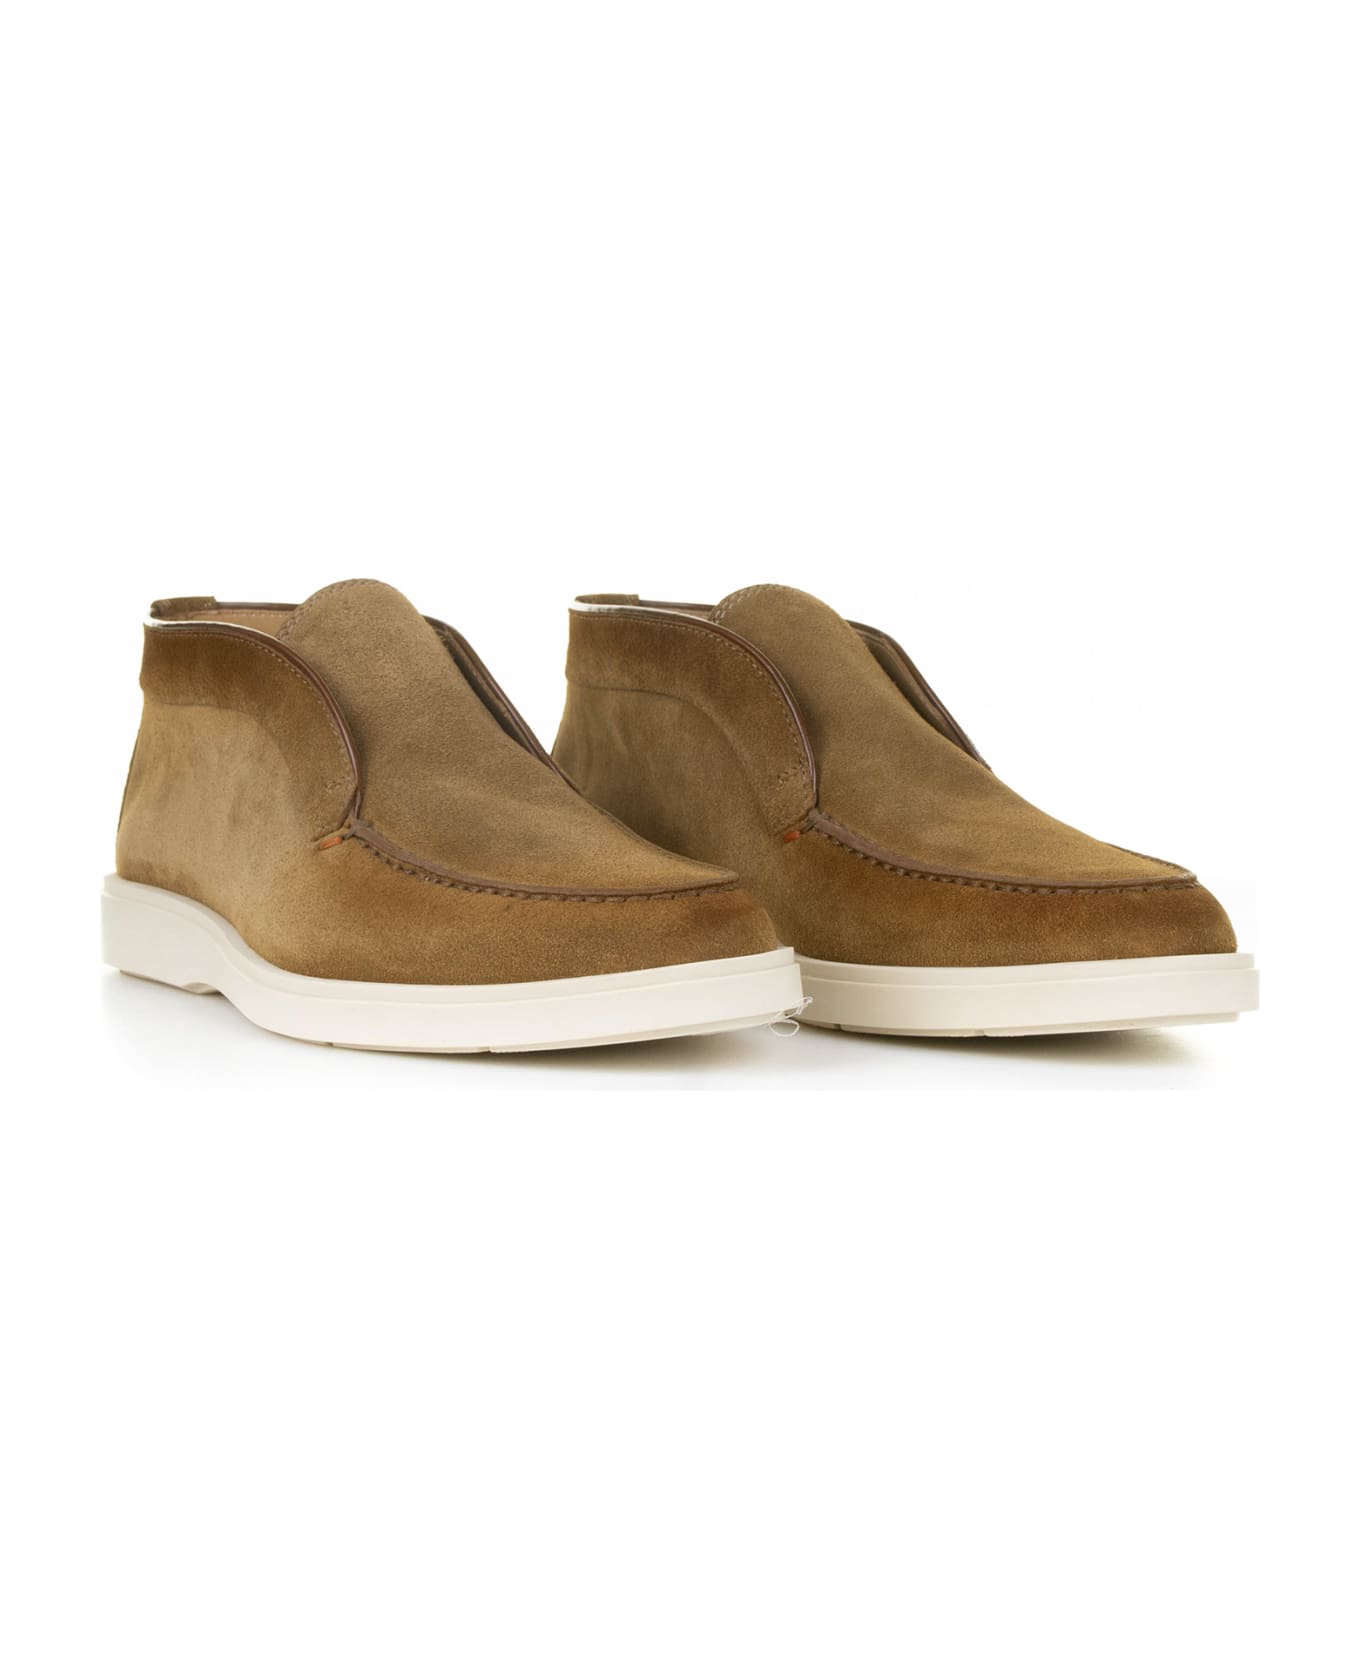 Santoni Brown Suede Ankle Boot With Rubber Sole - LIGHT BROWN